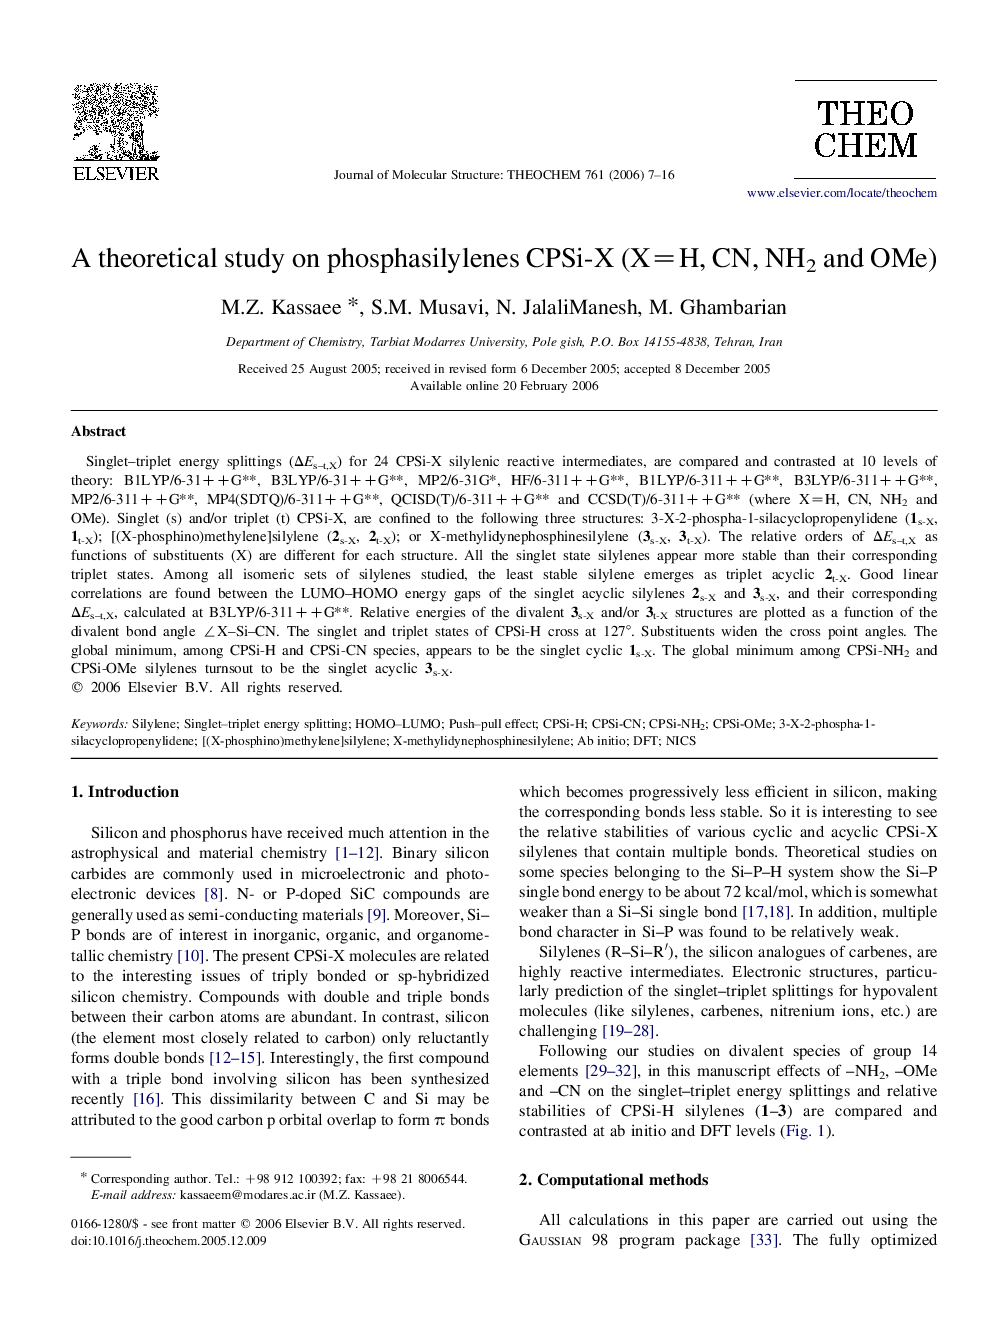 A theoretical study on phosphasilylenes CPSi-X (X=H, CN, NH2 and OMe)